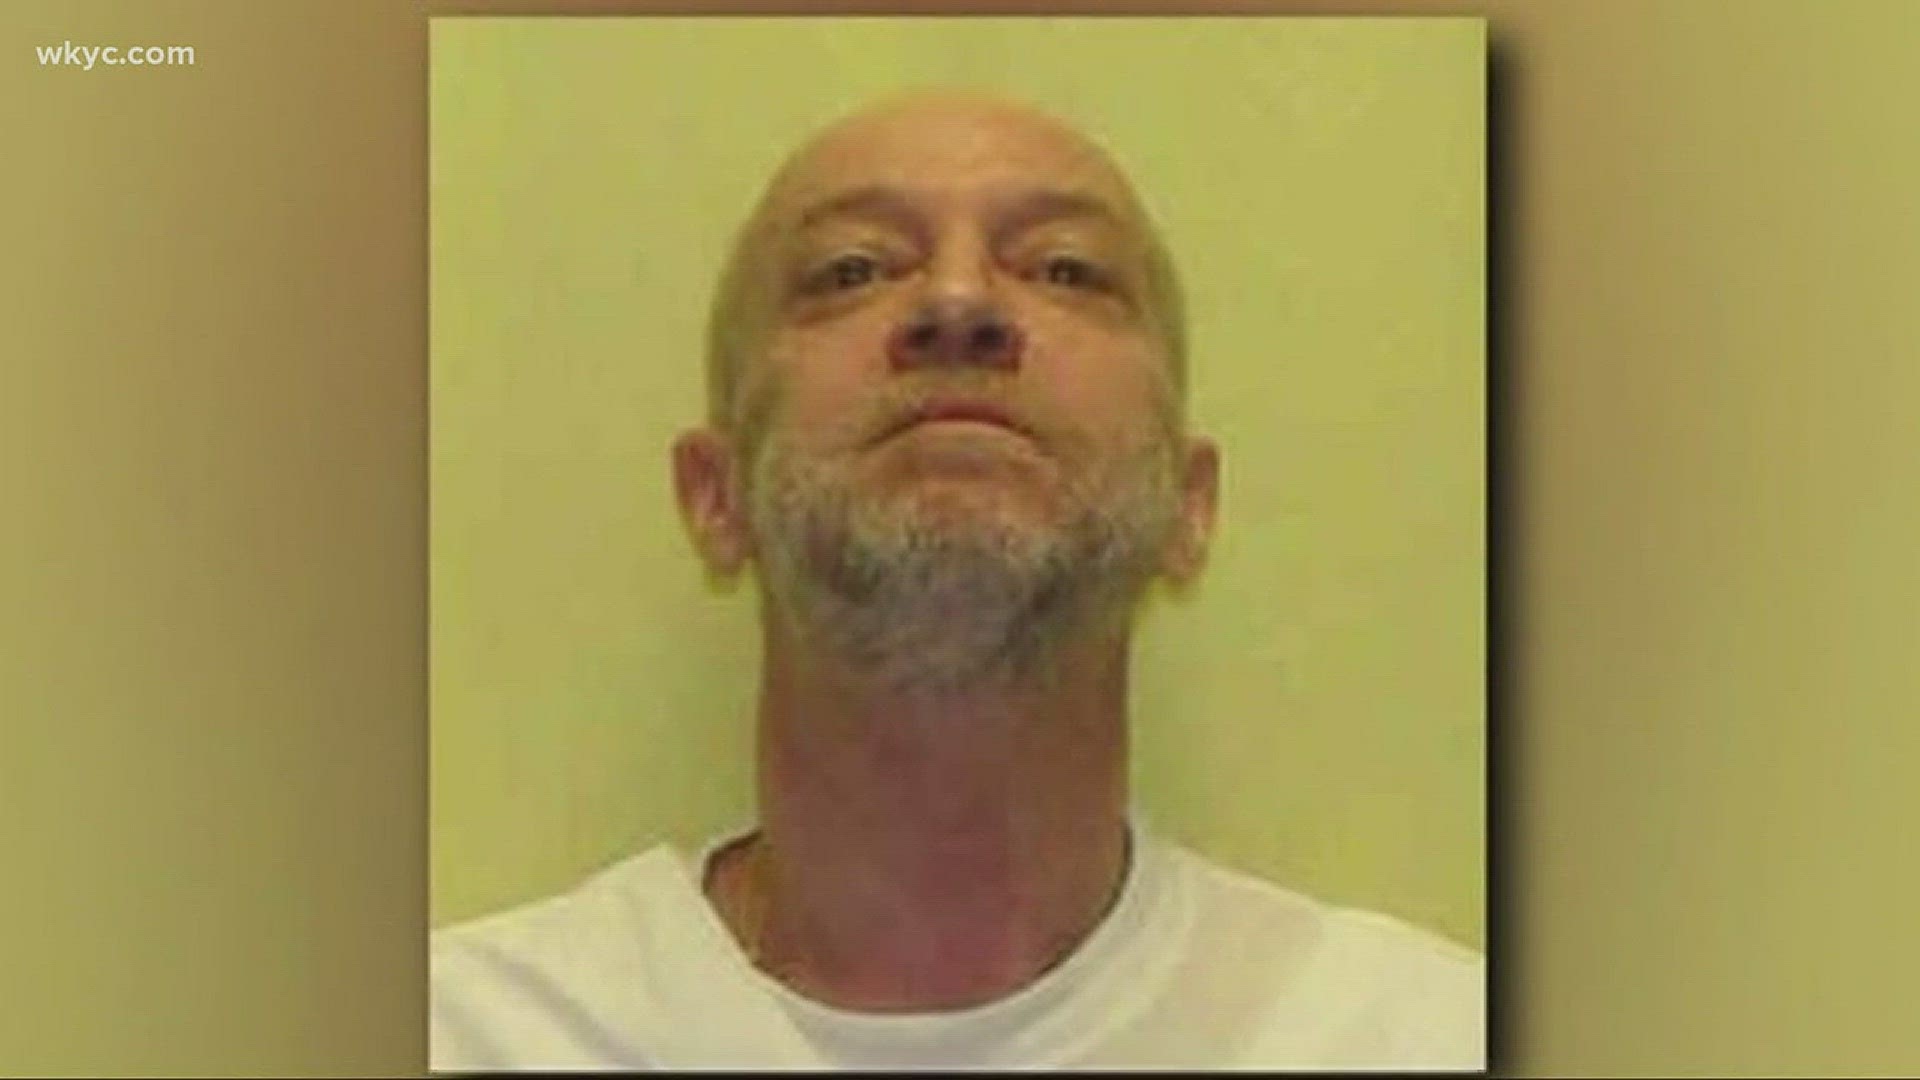 Jan. 28, 2018: Attorneys trying to stop the execution of a condemned Ohio killer in less than three weeks are drawing parallels between the state's opioid crisis and their client's drug abuse. Lawyers for death row inmate Raymond Tibbetts say his life spi